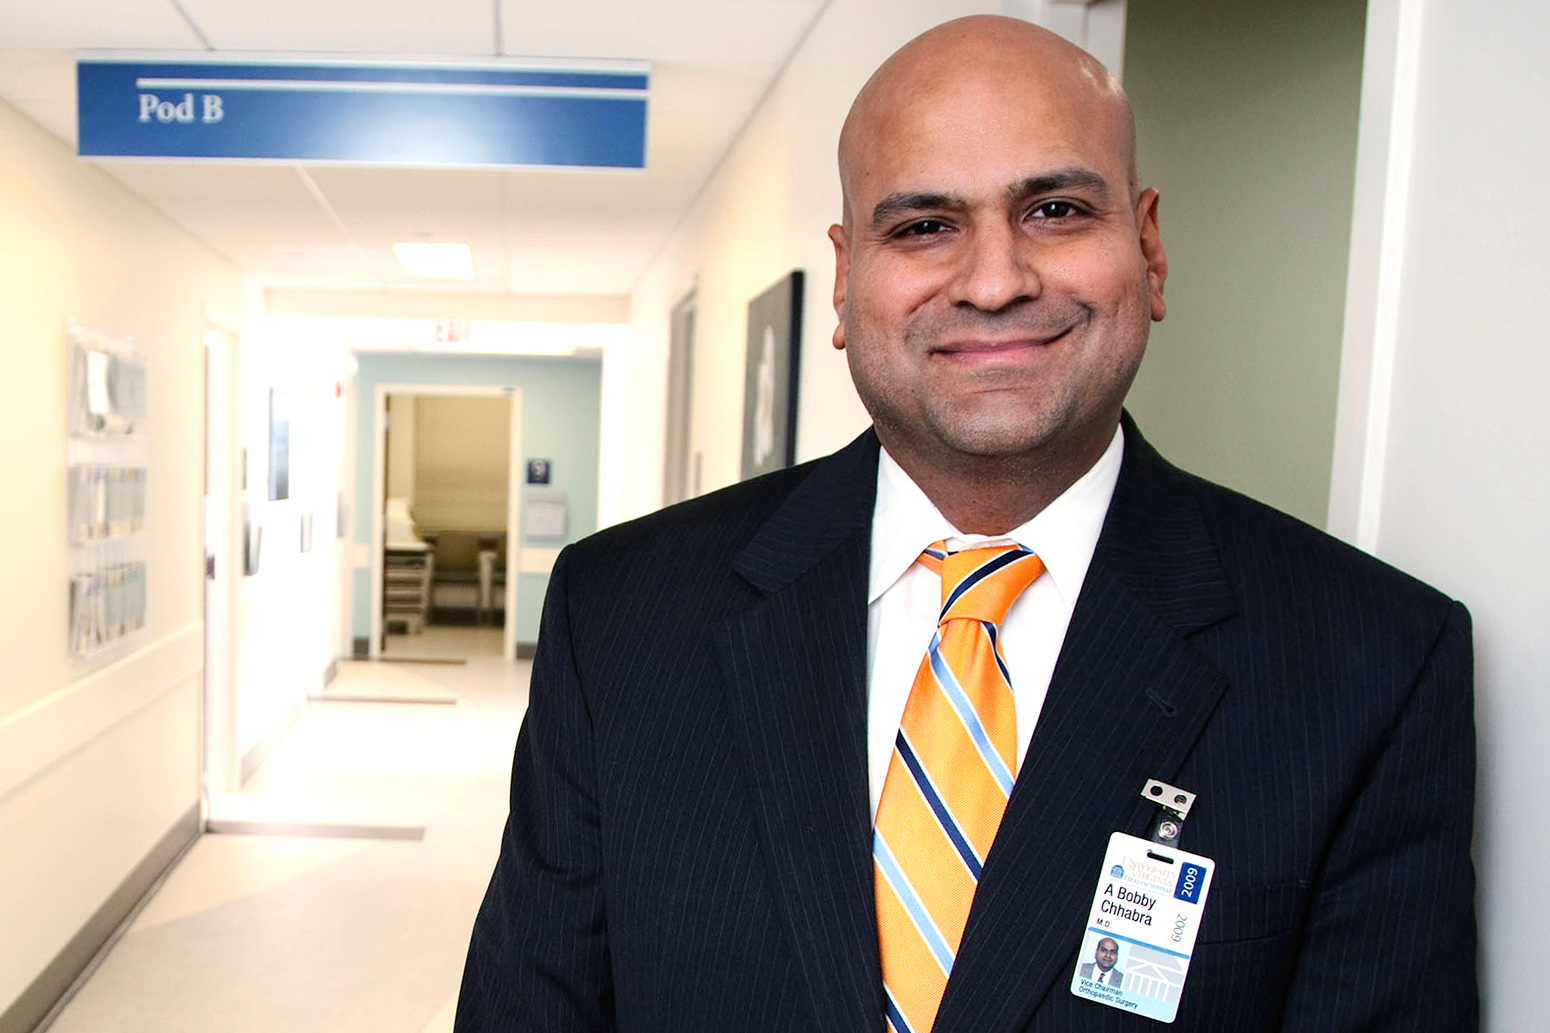 Dr. A. Bobby Chhabra, chair of orthopedic surgery for UVA Health System, says regenerative medicine “has the potential to revolutionize health care.” 